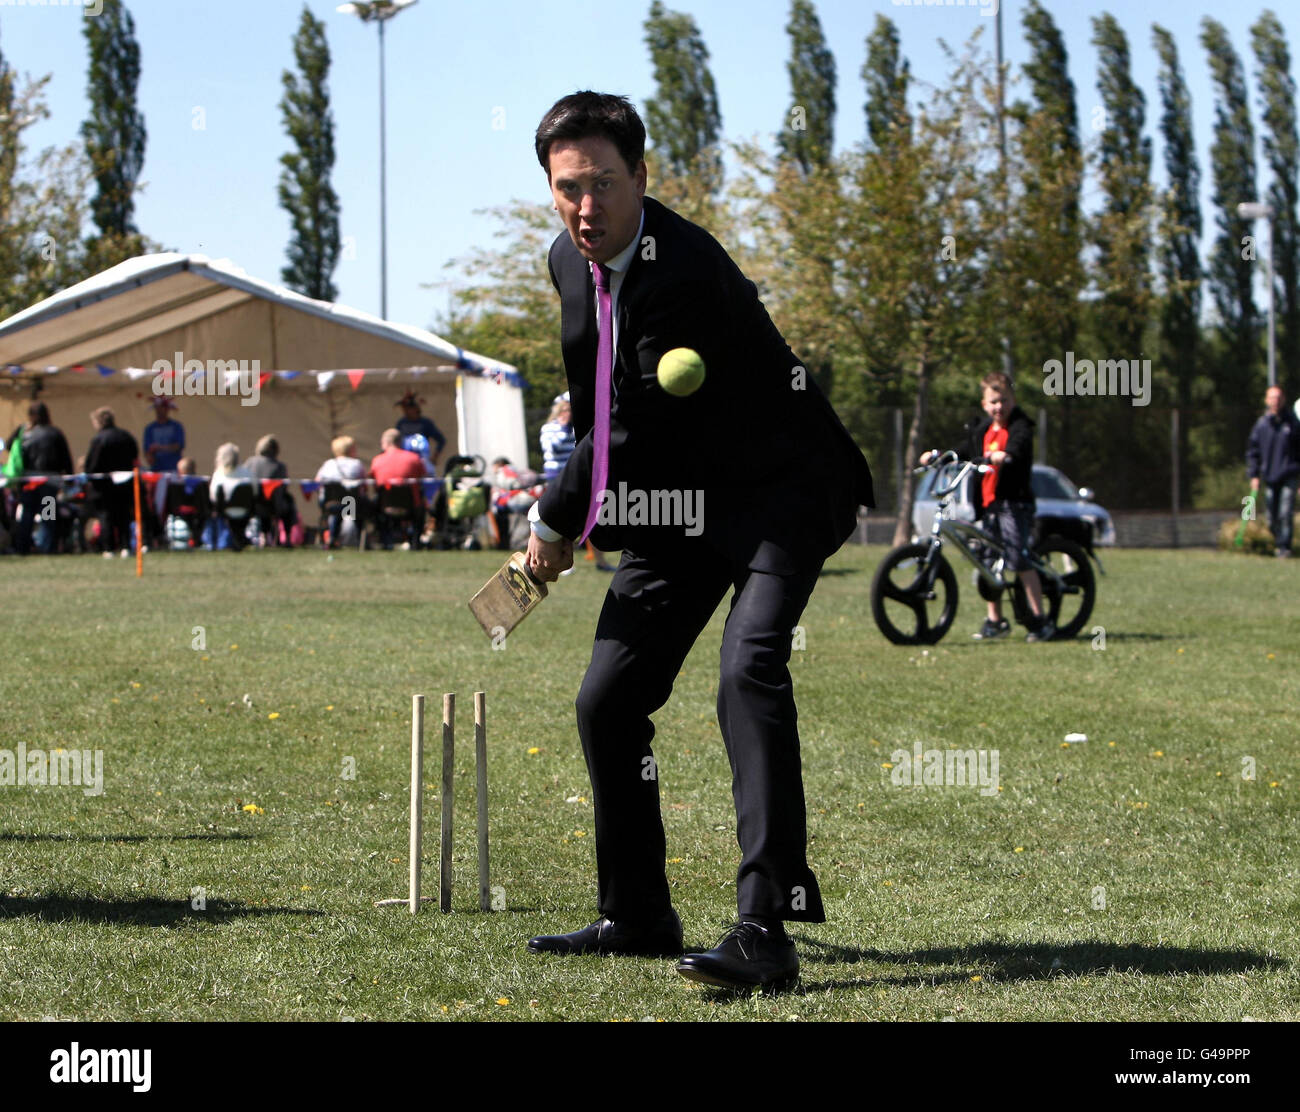 Local Elections. Labour leader Ed Miliband plays cricket during an election visit to Kirkby in Ashfield, Nottinghamshire. Stock Photo